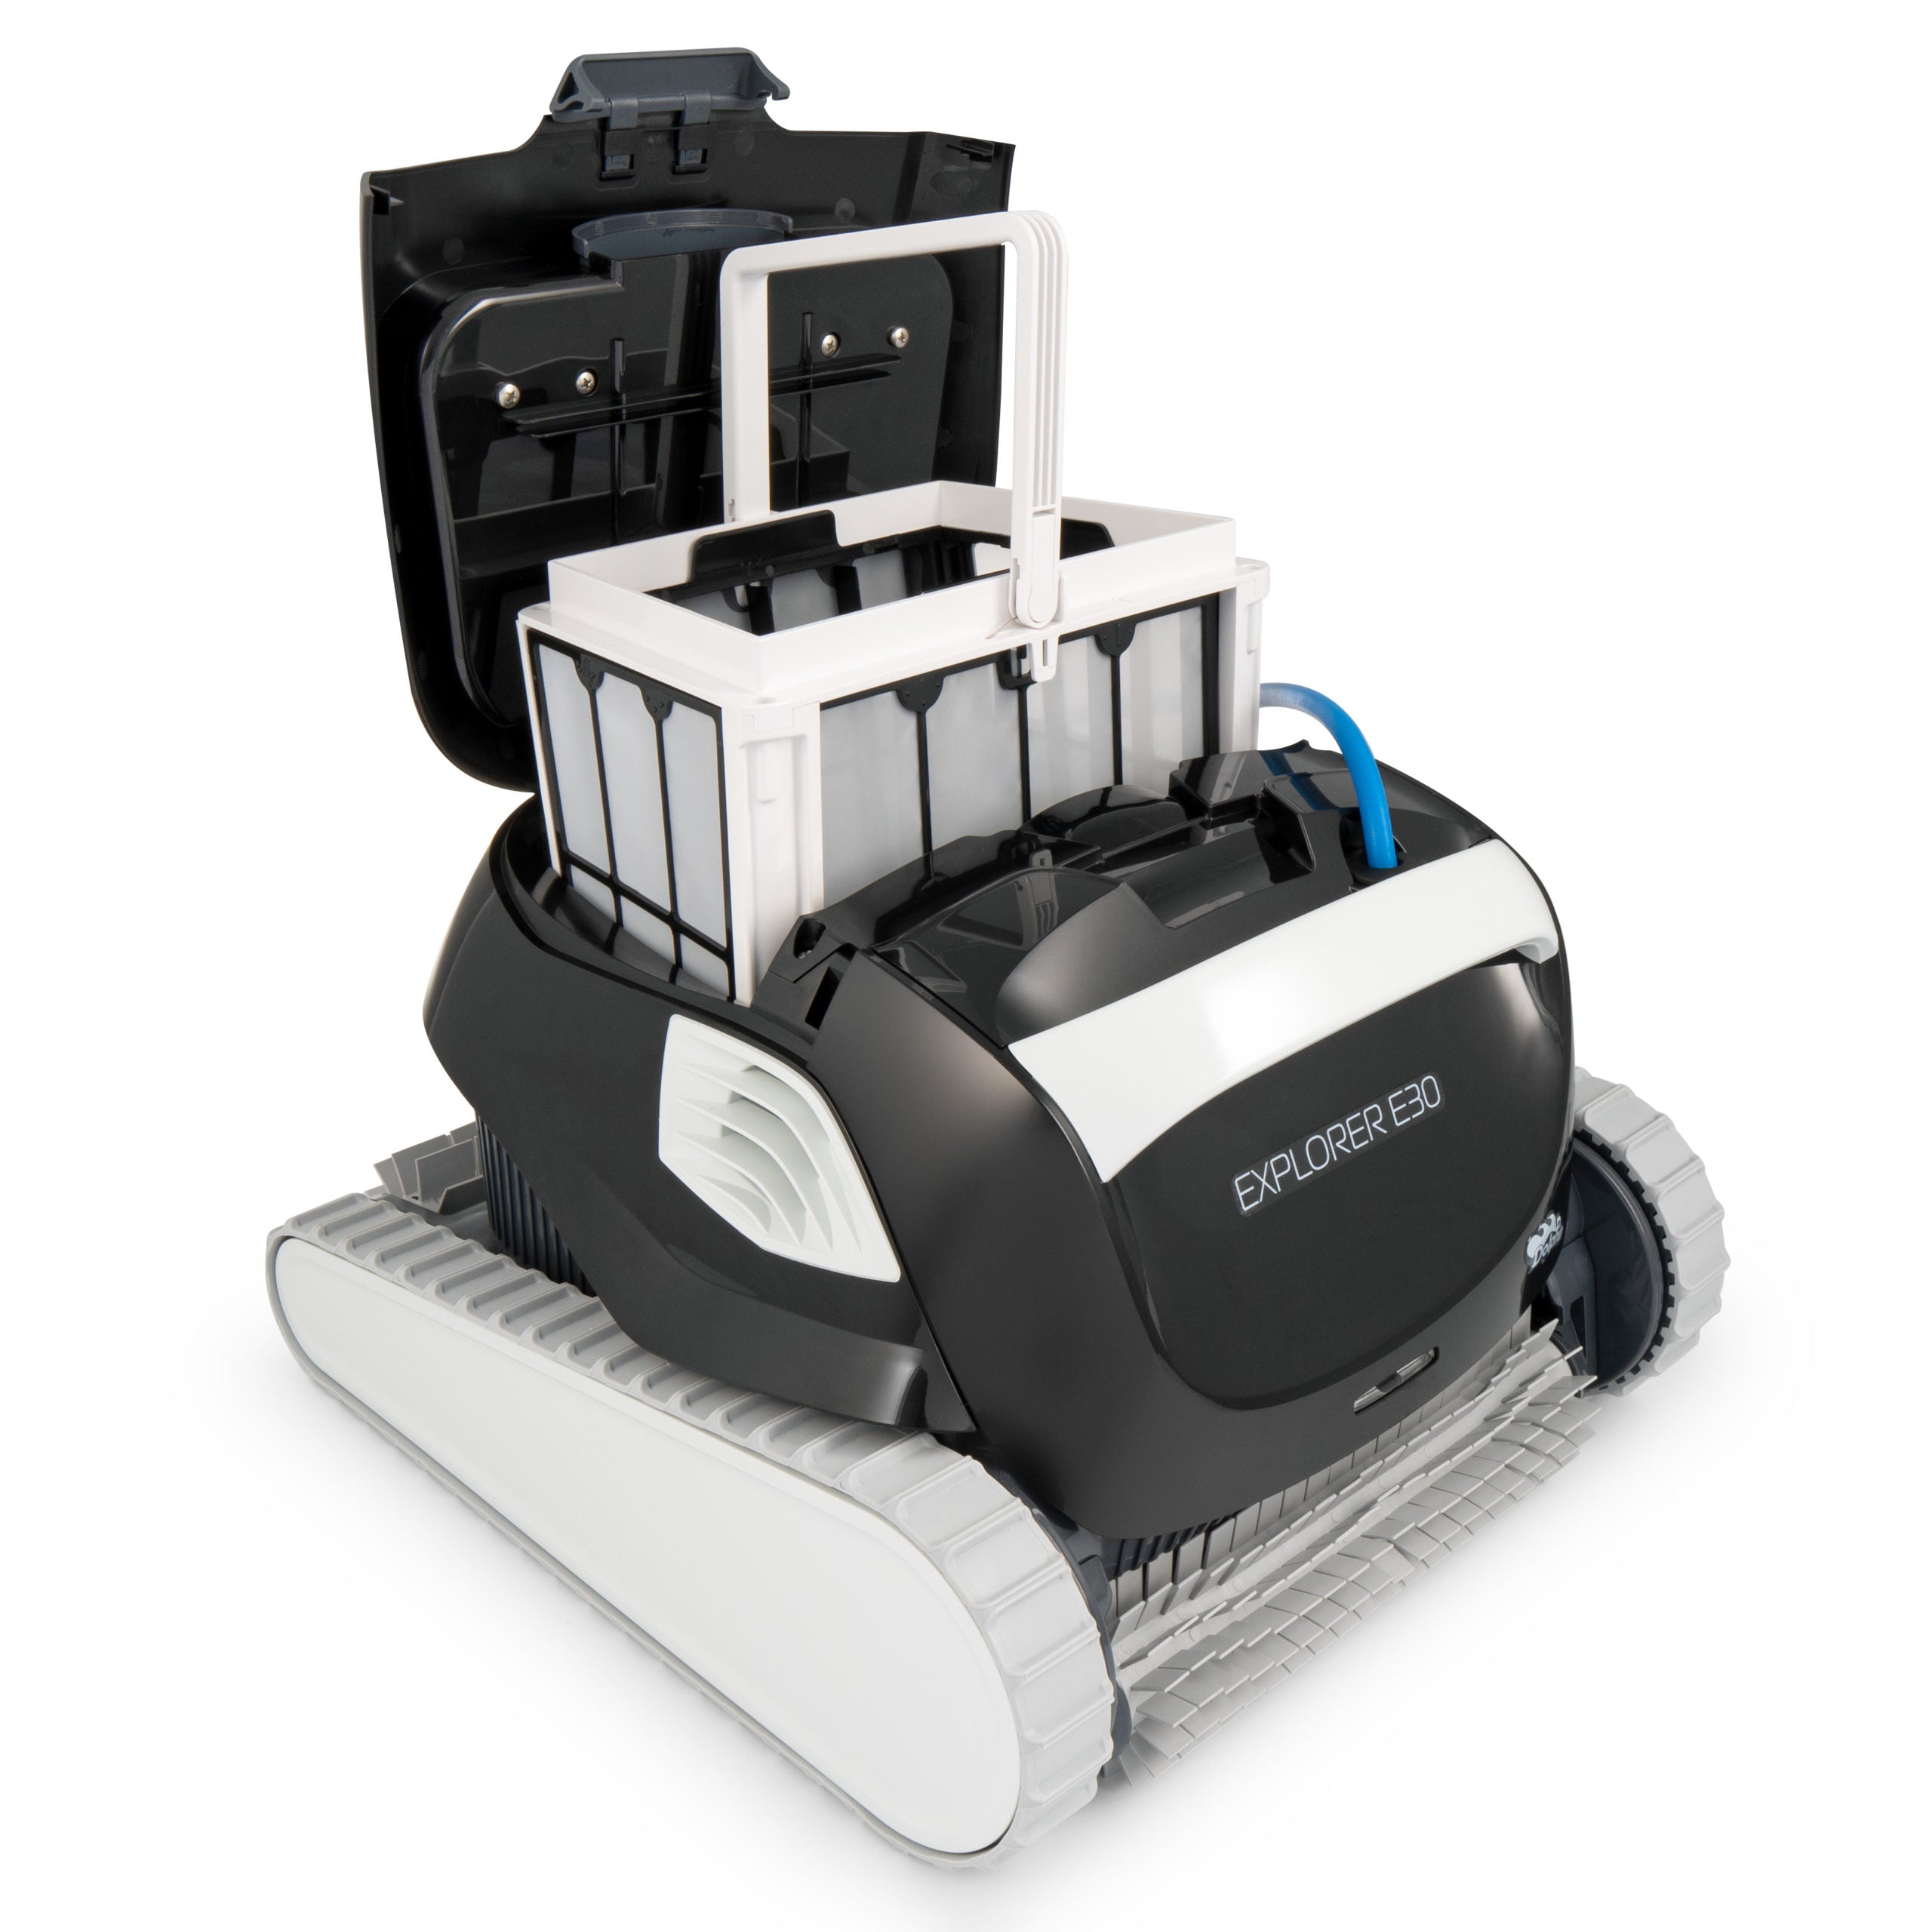 Ships Next Day New Maytronics Dolphin E30 Robotic Pool Cleaner